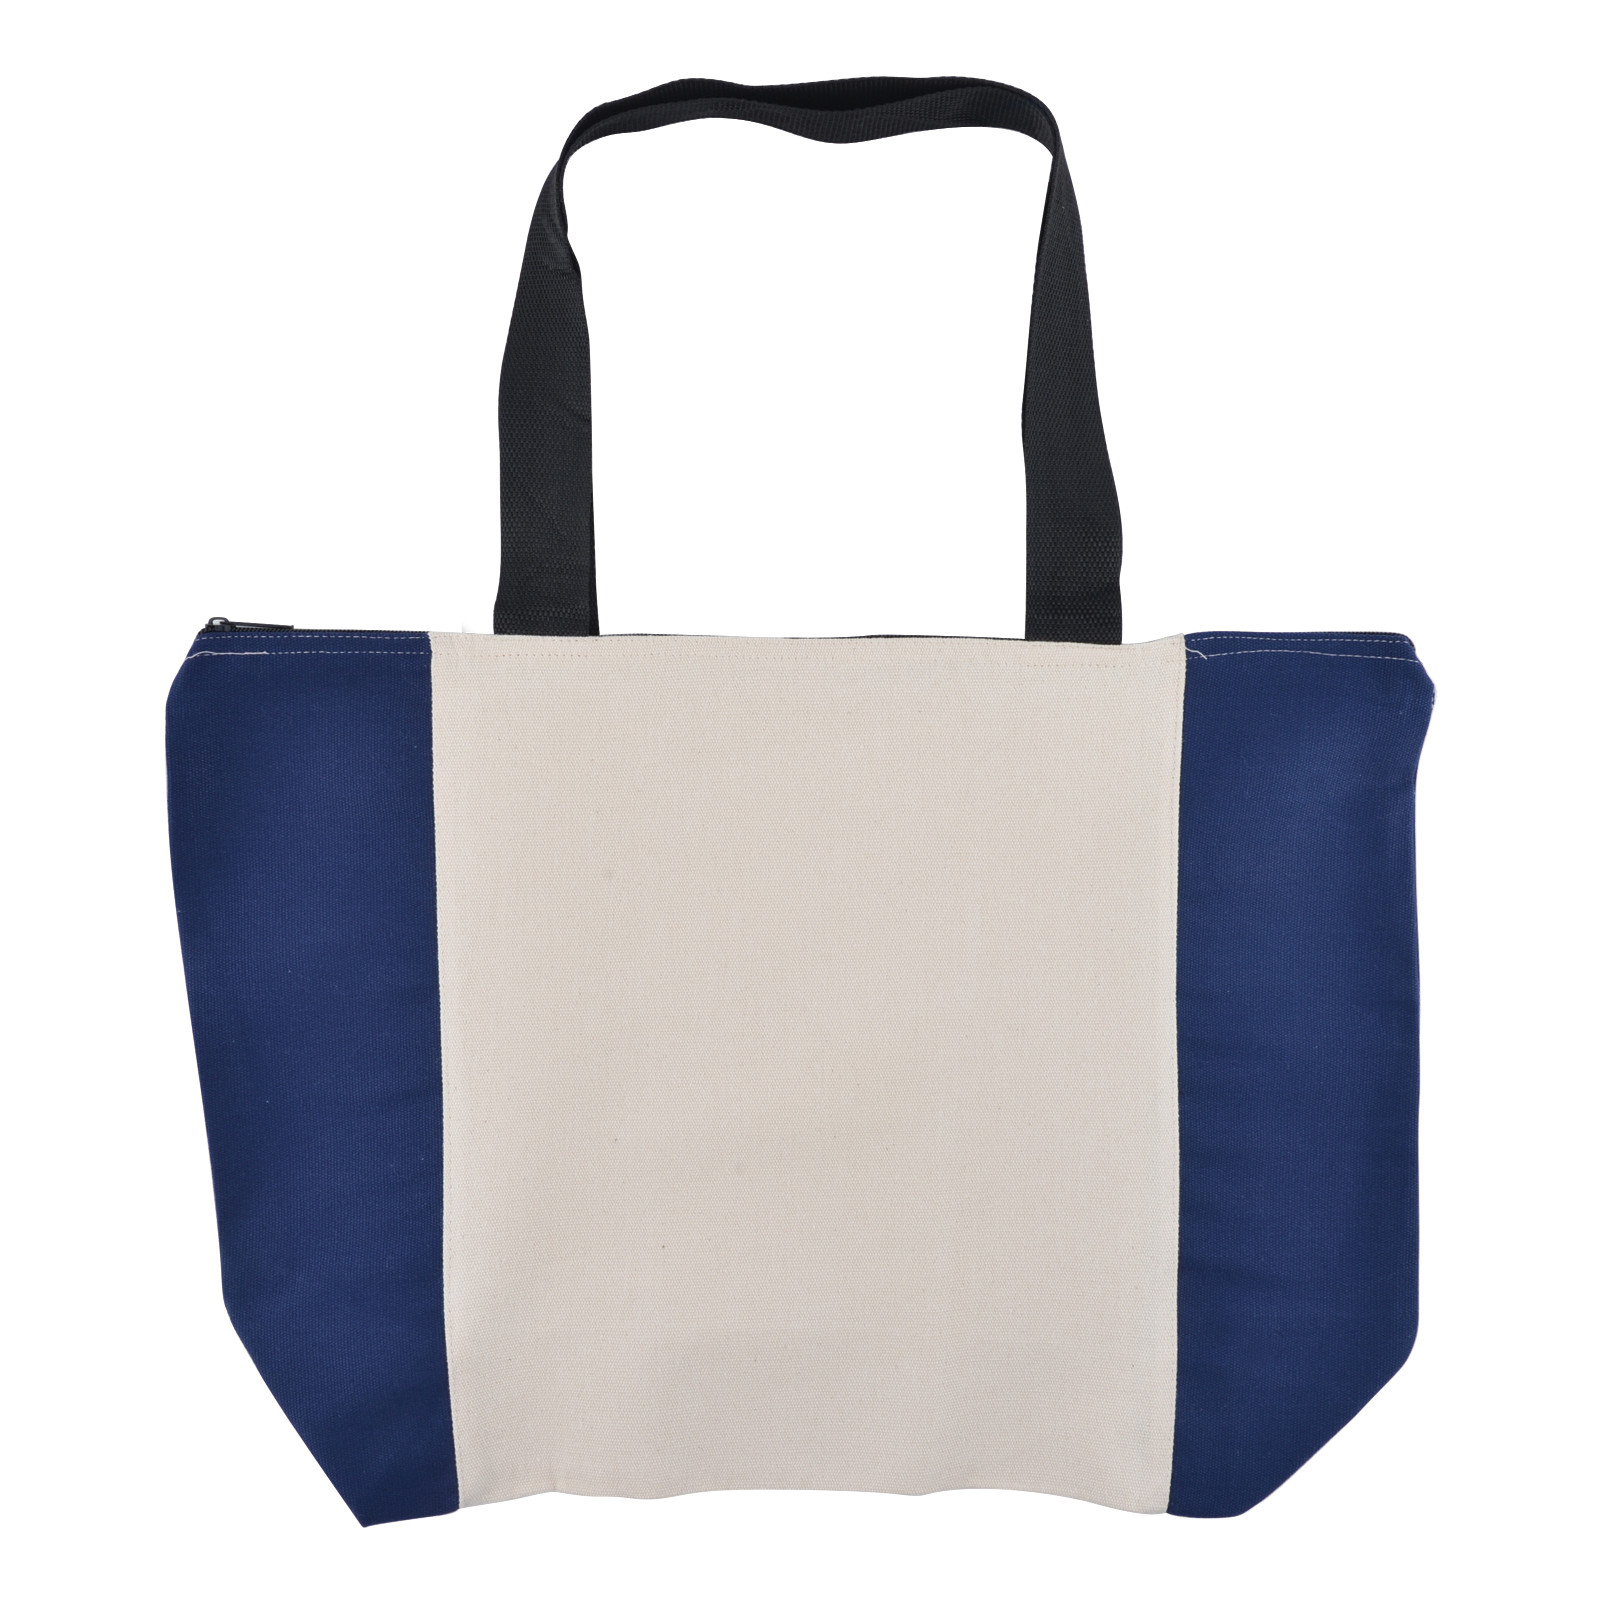 LL525 Carry All Calico Zip Grocery Bag - 305 GSM